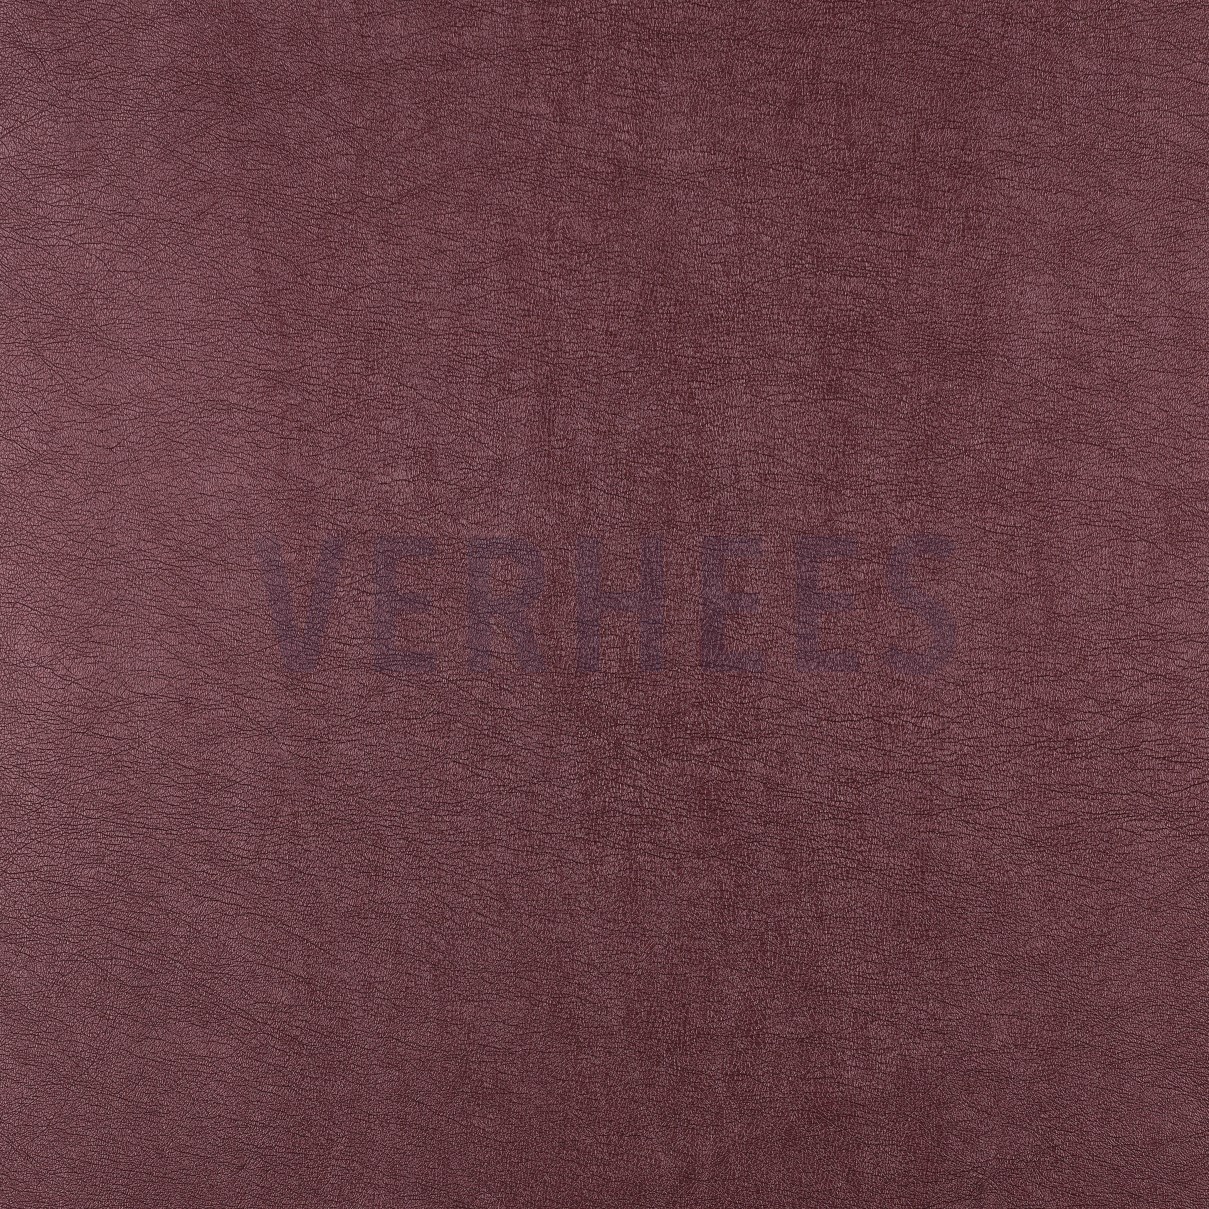 FAUX LEATHER BERRY METALLIC (high resolution)